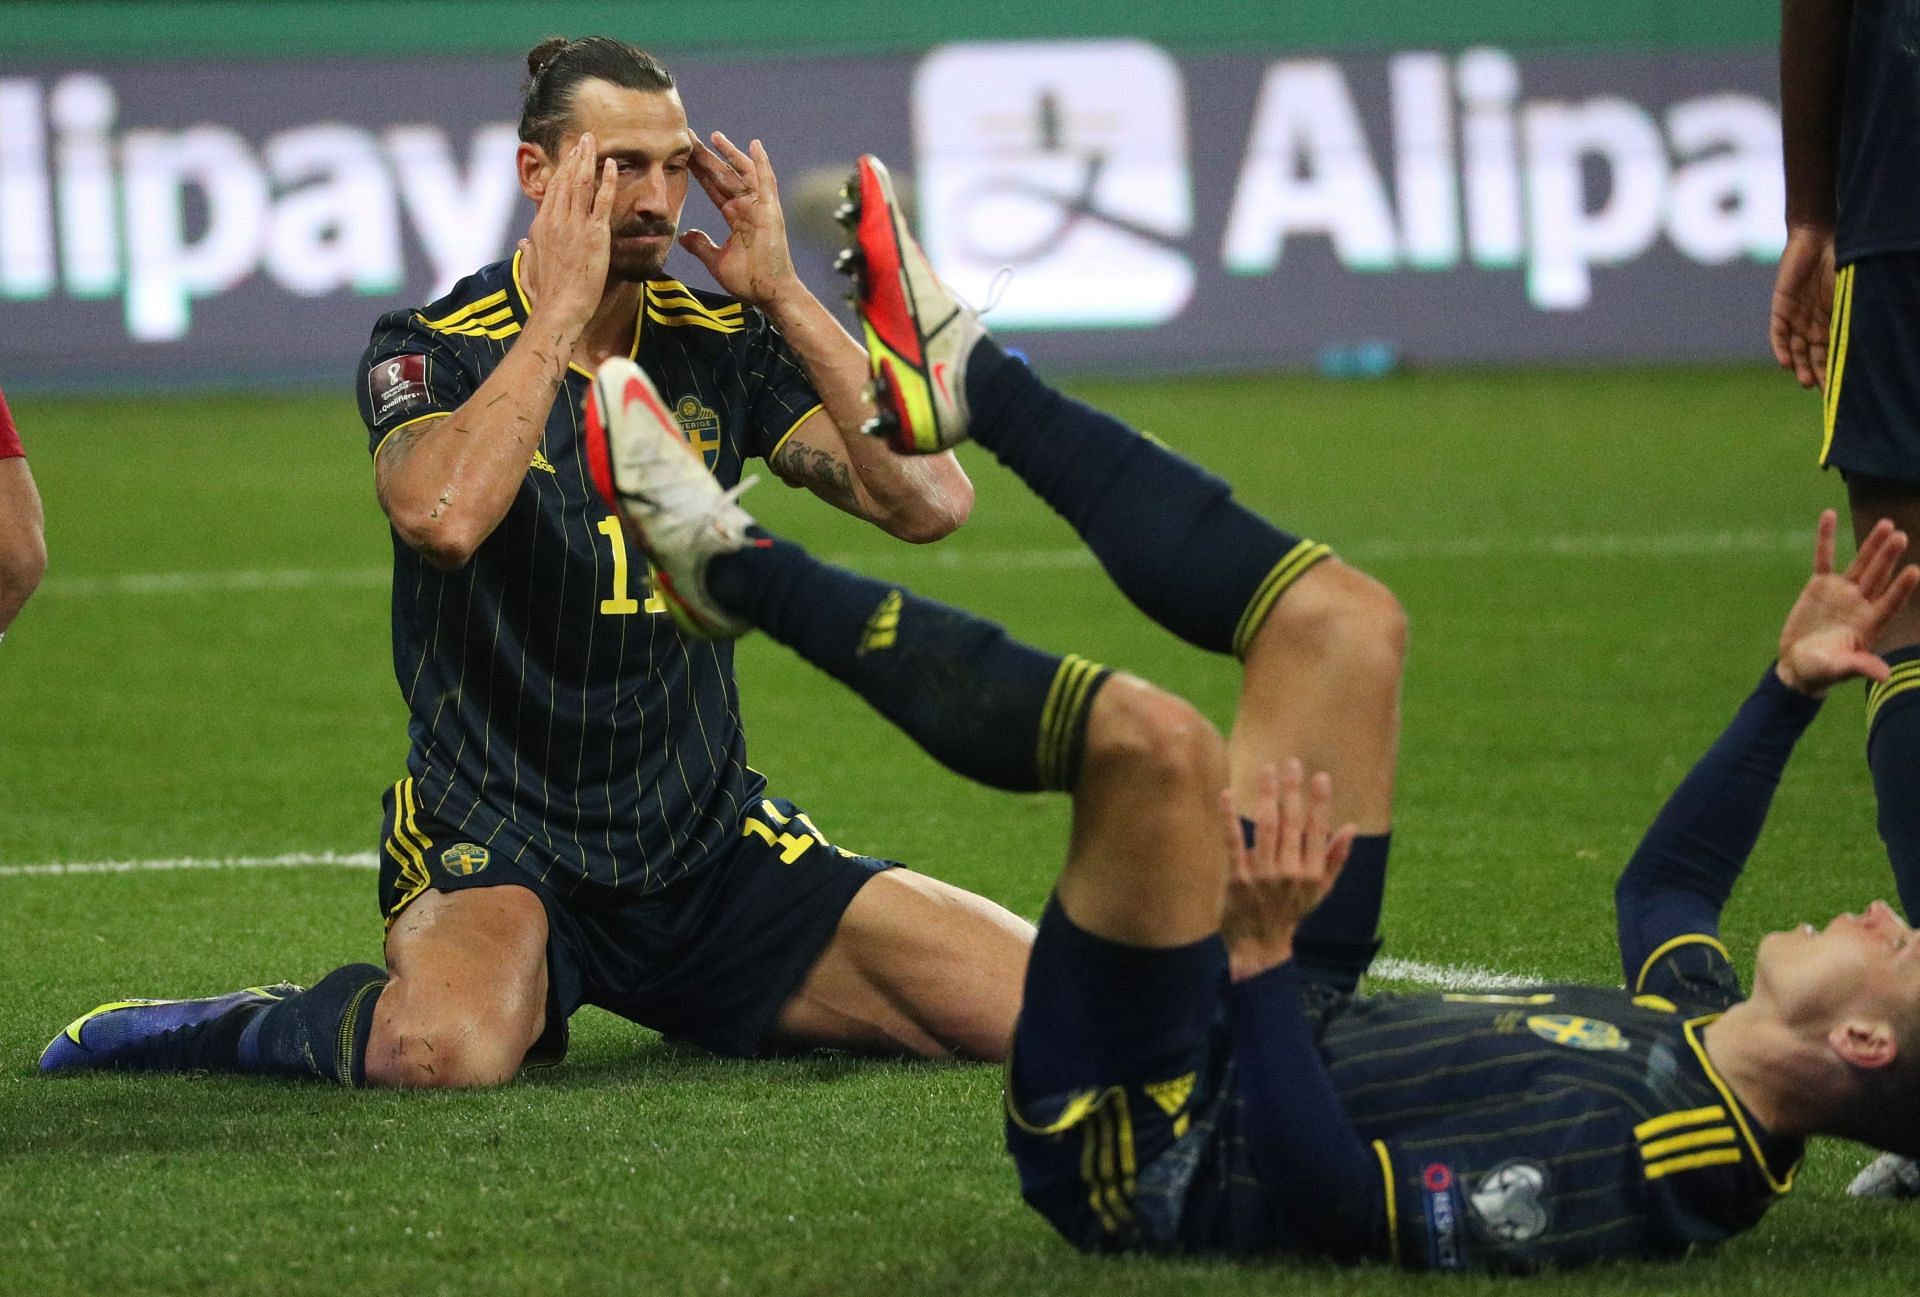 Sweden suffered a shock 2-0 defeat at Georgia.